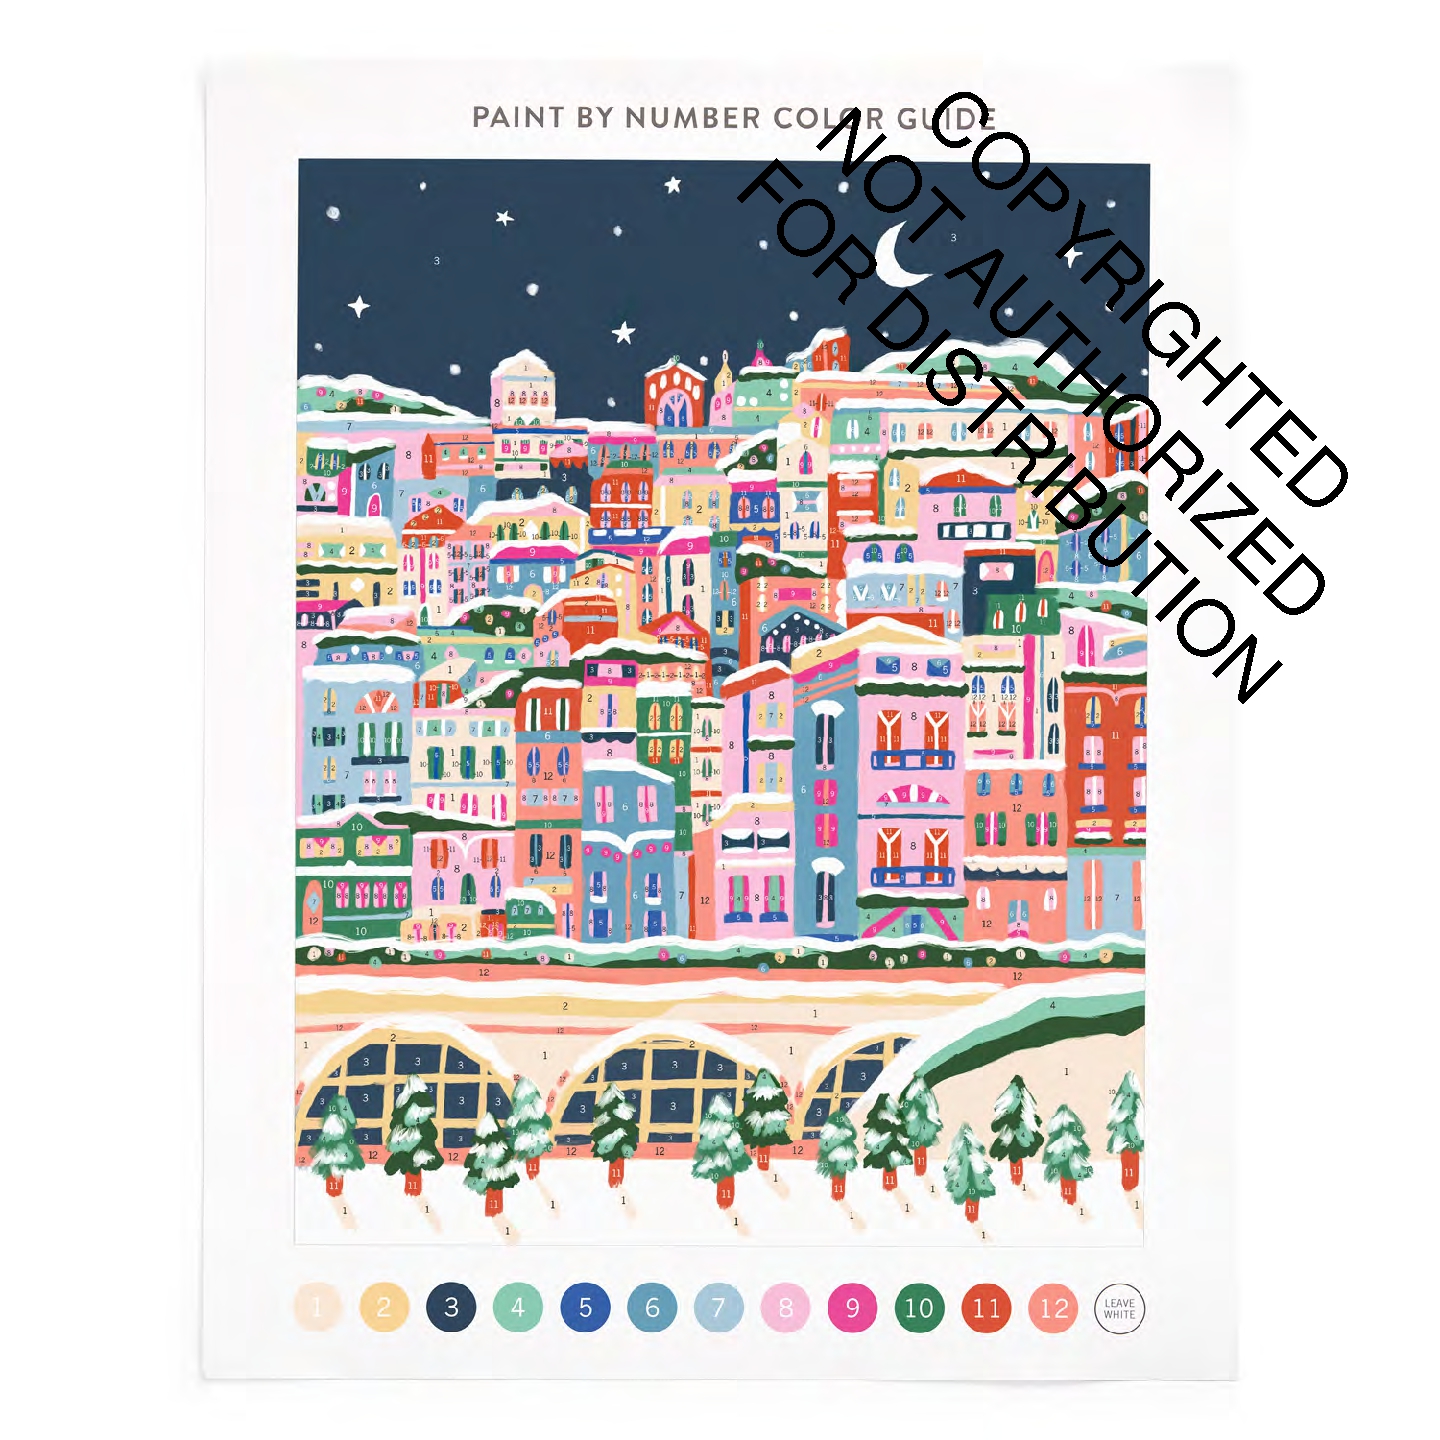 Snowy City 11x14 Paint by Number Kit